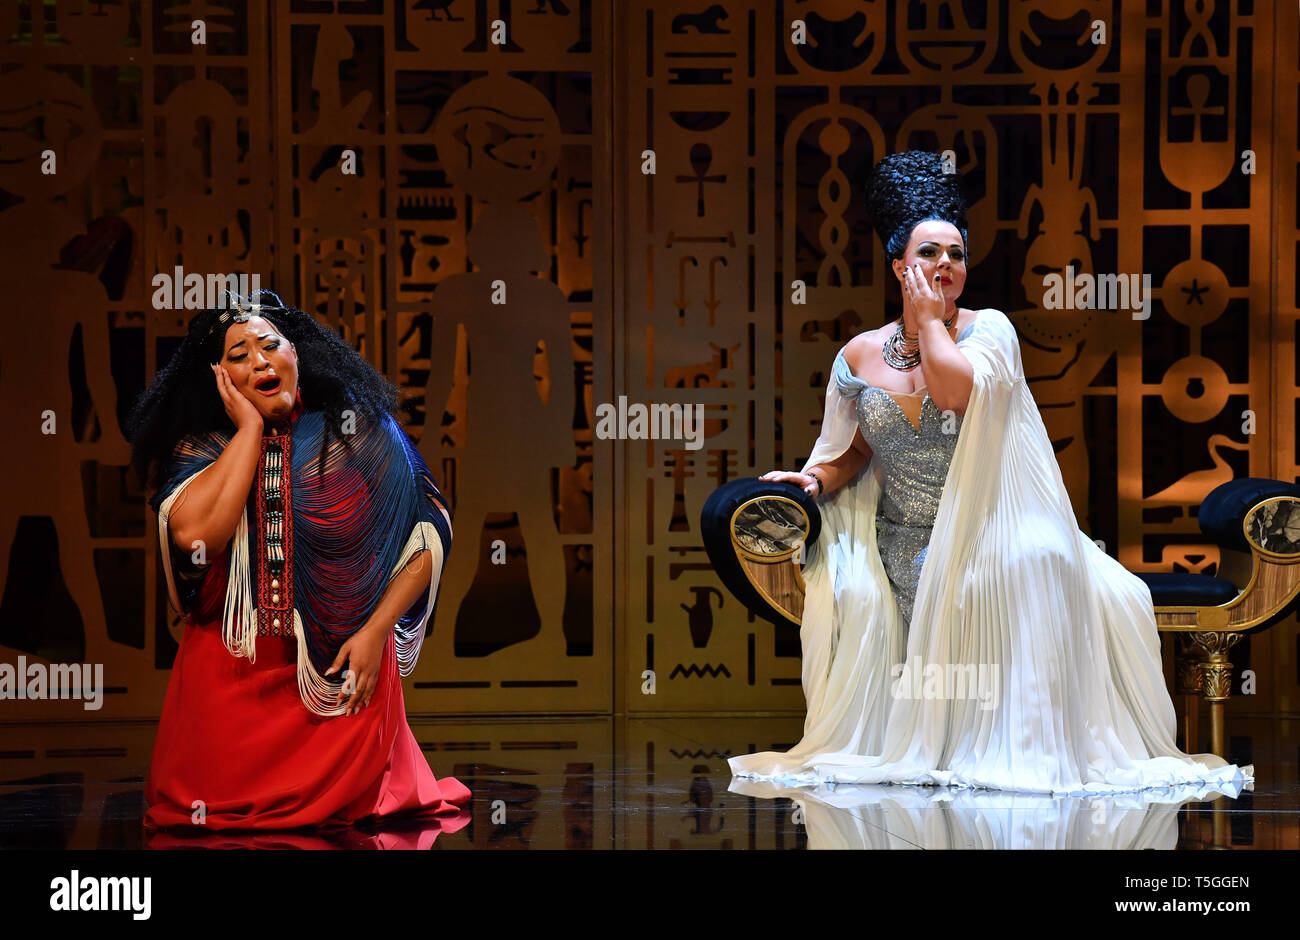 Erfurt, Germany. 24th Apr, 2019. Michelle Bradley (l) as Aida and Eliska Weissova as Amneris rehearse a scene from the opera 'Aida' by Giuseppe Verdi on the stage of the Theater Erfurt. The production by Andre Heller-Lopes will premiere on 27 April 2019. It is the penultimate production of the current season of the Erfurt Theatre. Credit: Martin Schutt/dpa-Zentralbild/dpa/Alamy Live News Stock Photo